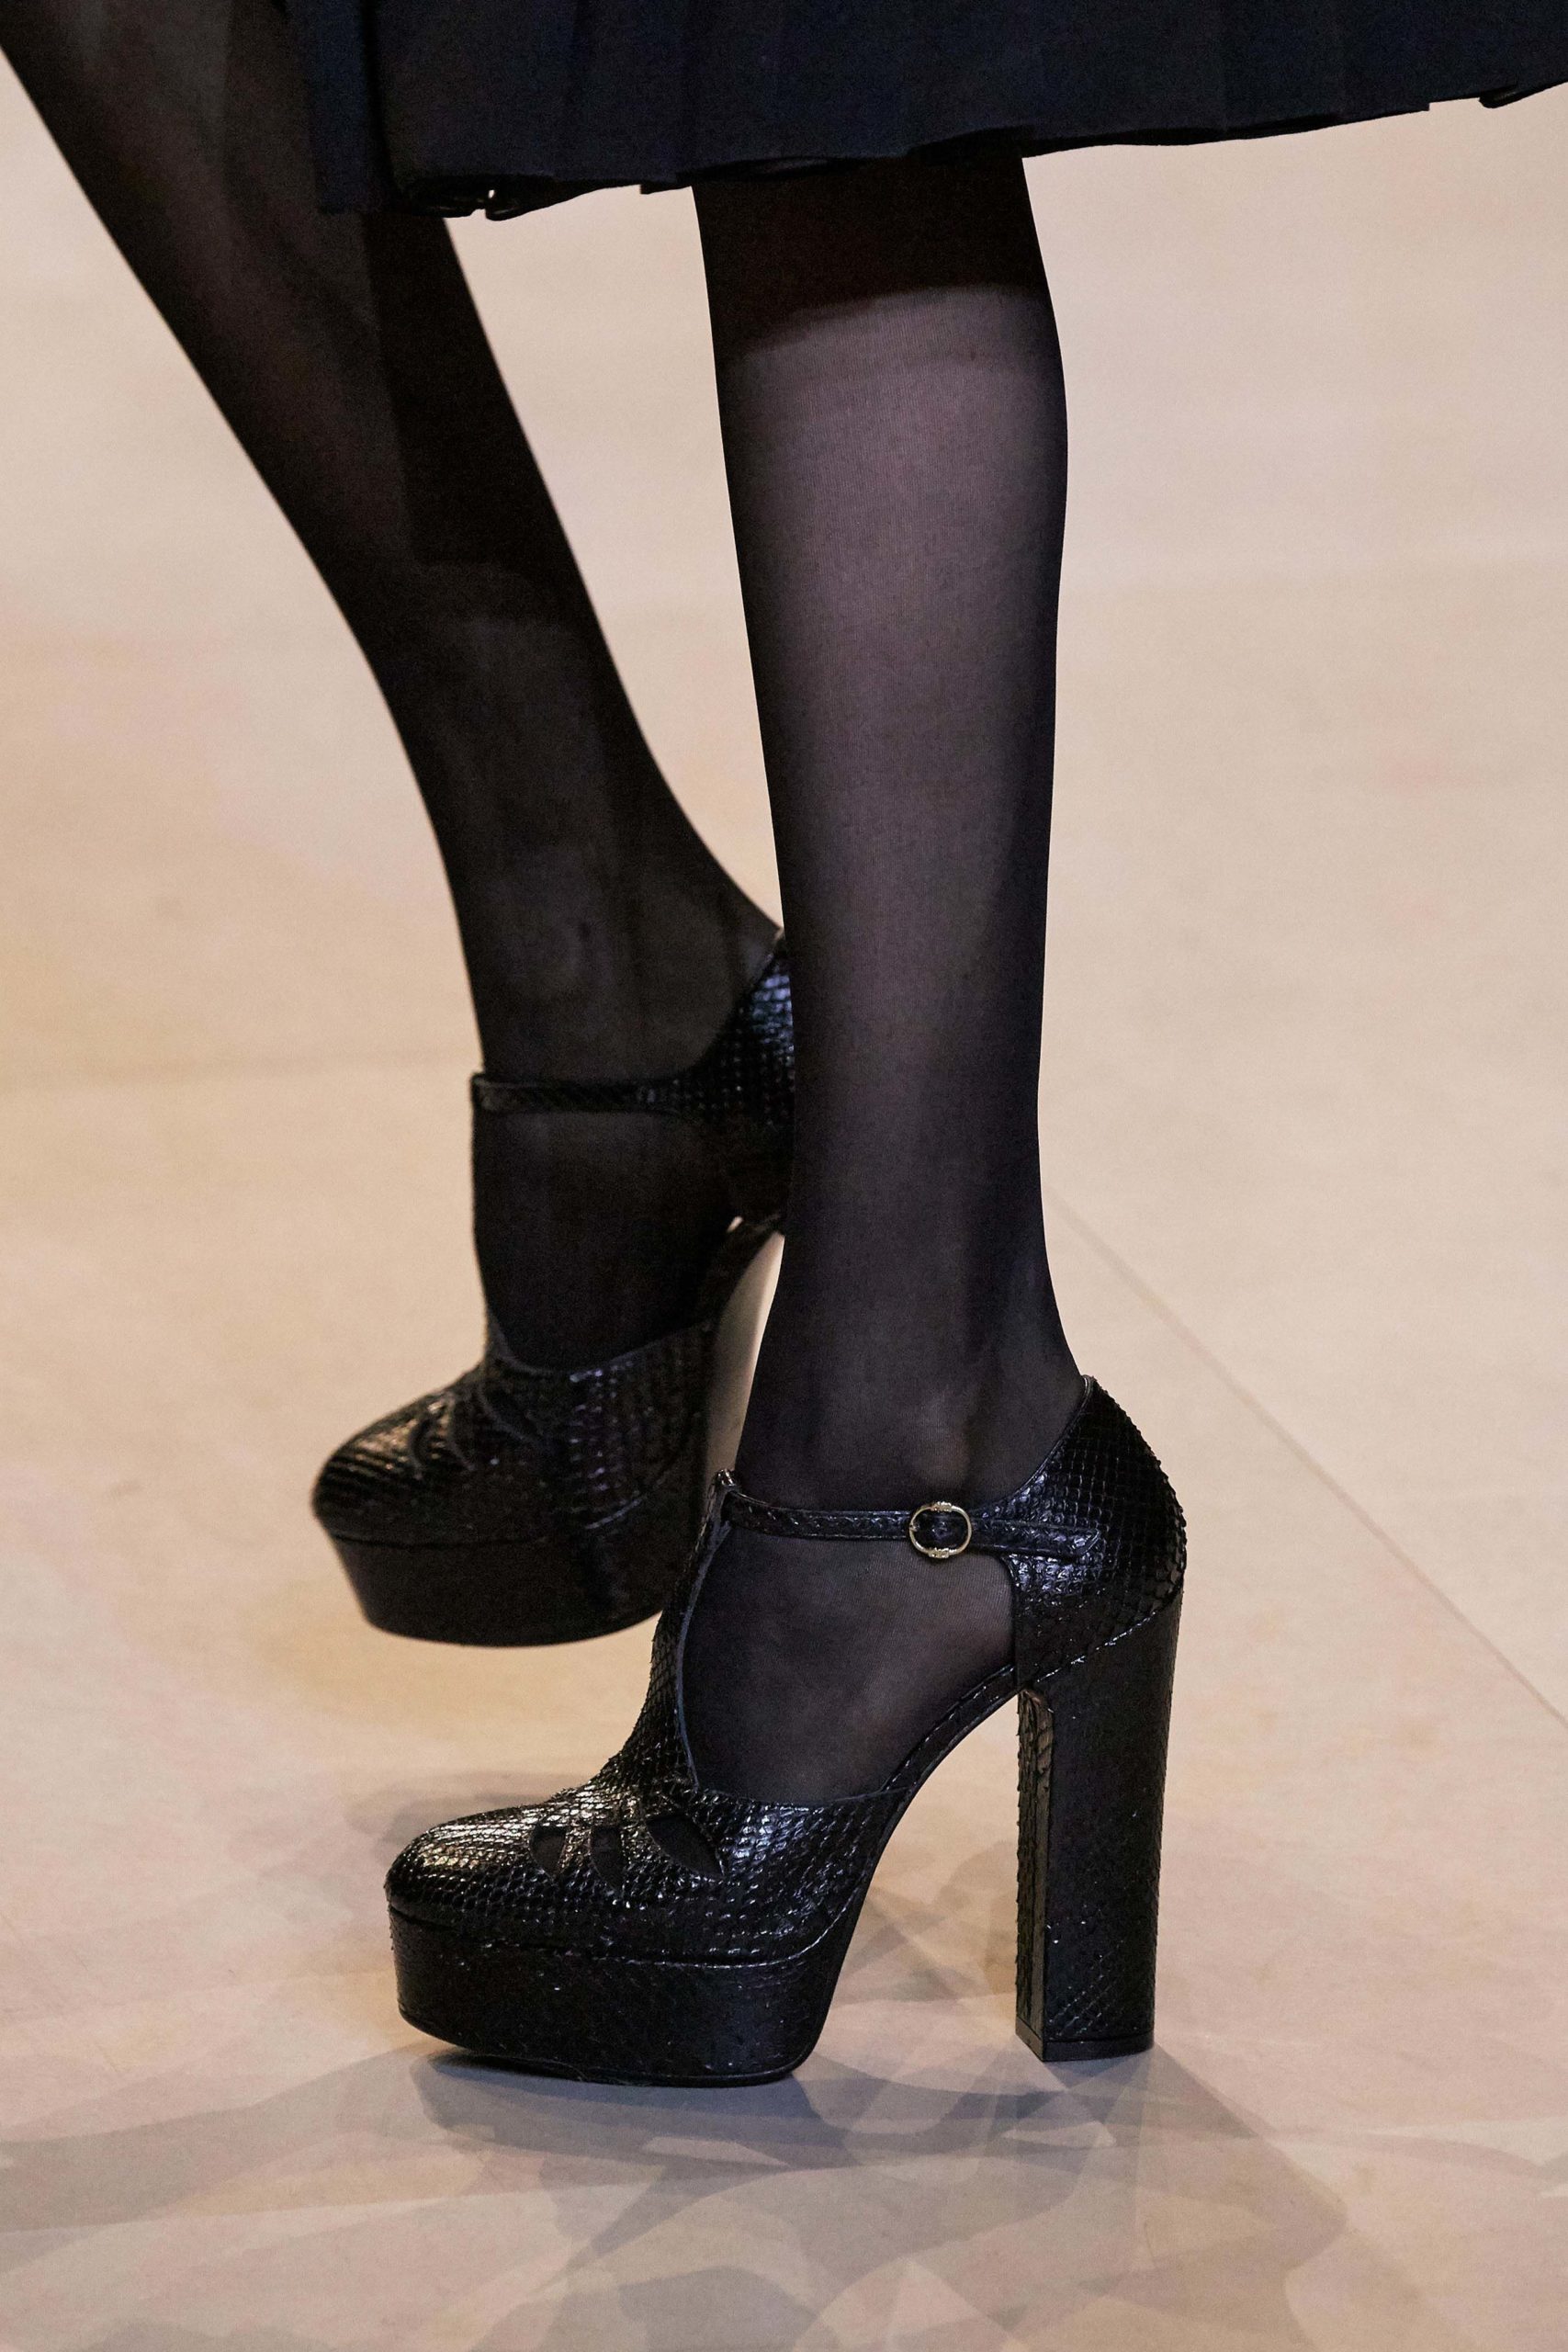 Celine Fall Winter 2020 trends runway coverage Ready To Wear Vogue shoes